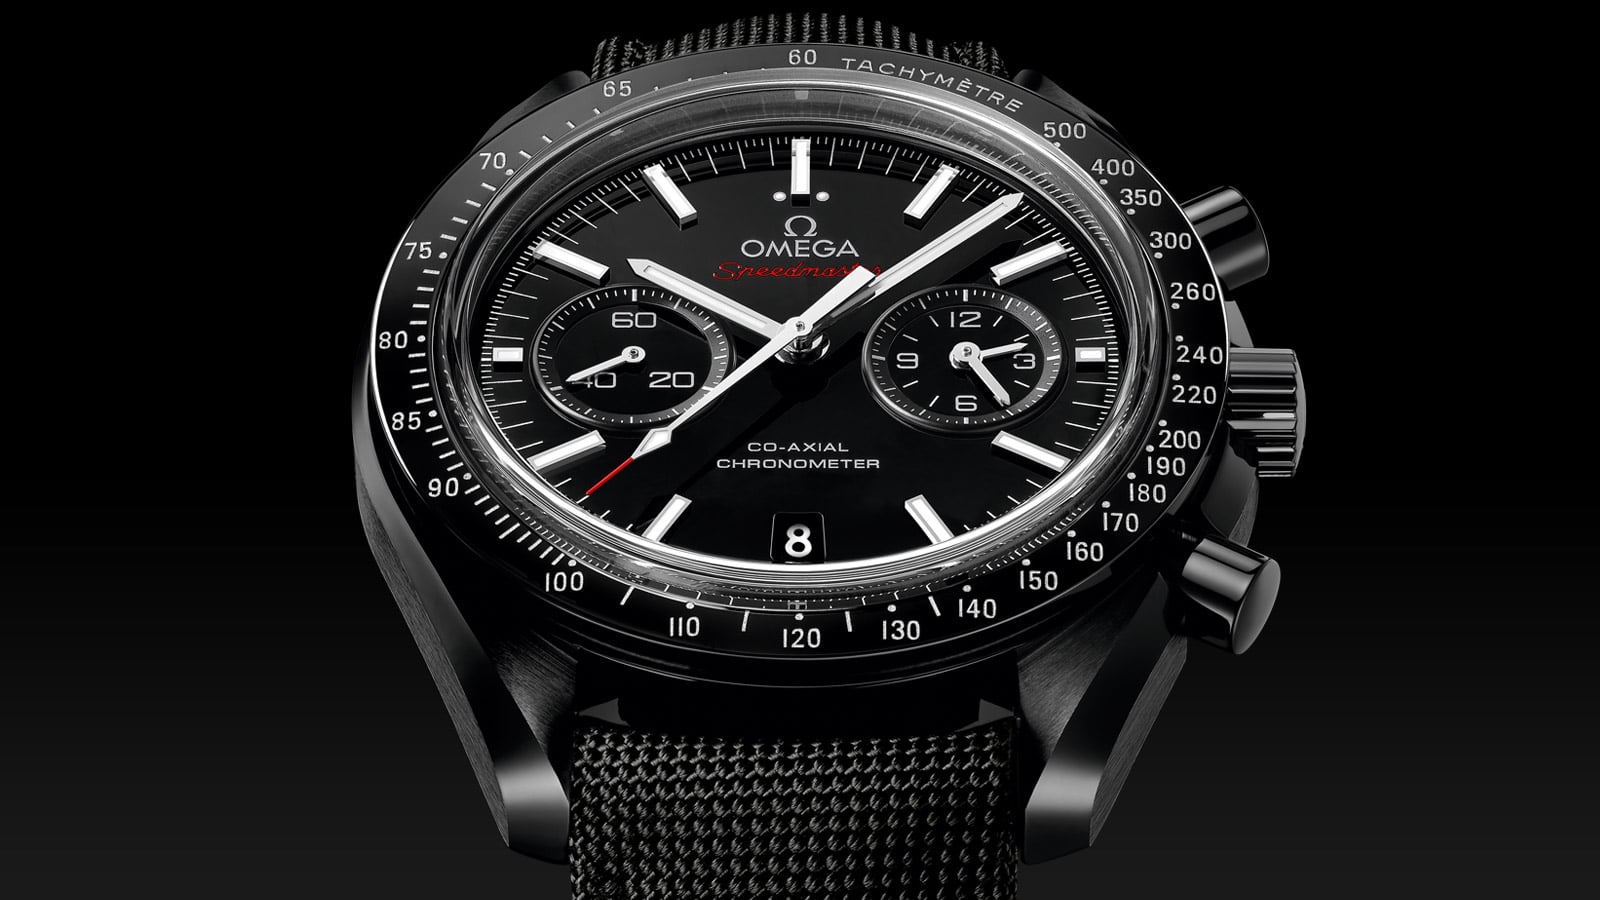 Is My Bell & Ross Airborne Watch Fake